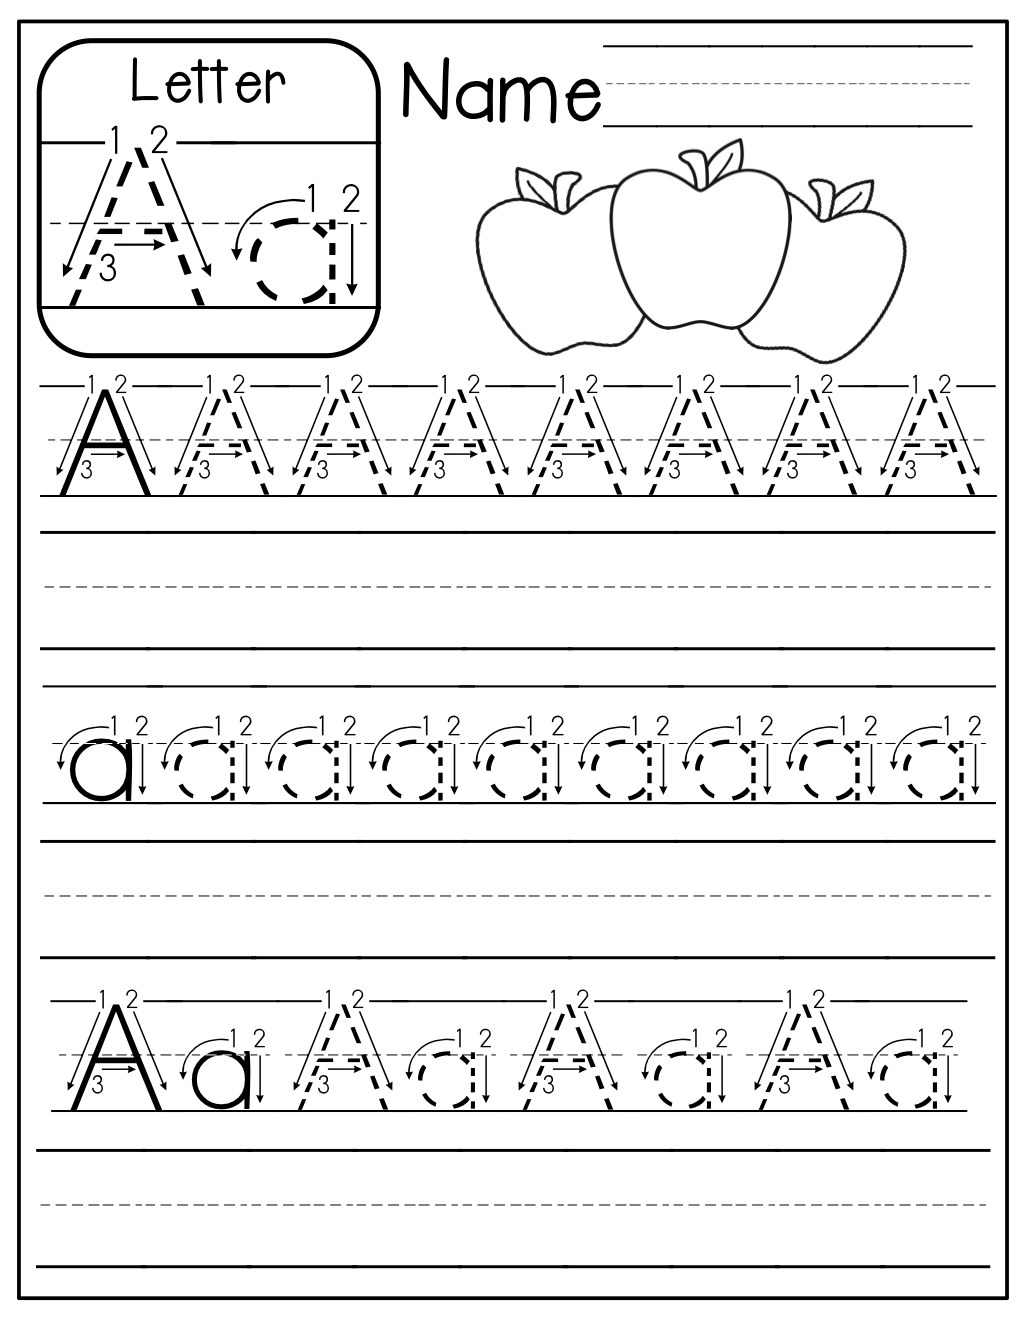 Free Handwriting Practice Pages! Just Place In Sheet Protectors And - Free Printable Practice Name Writing Sheets